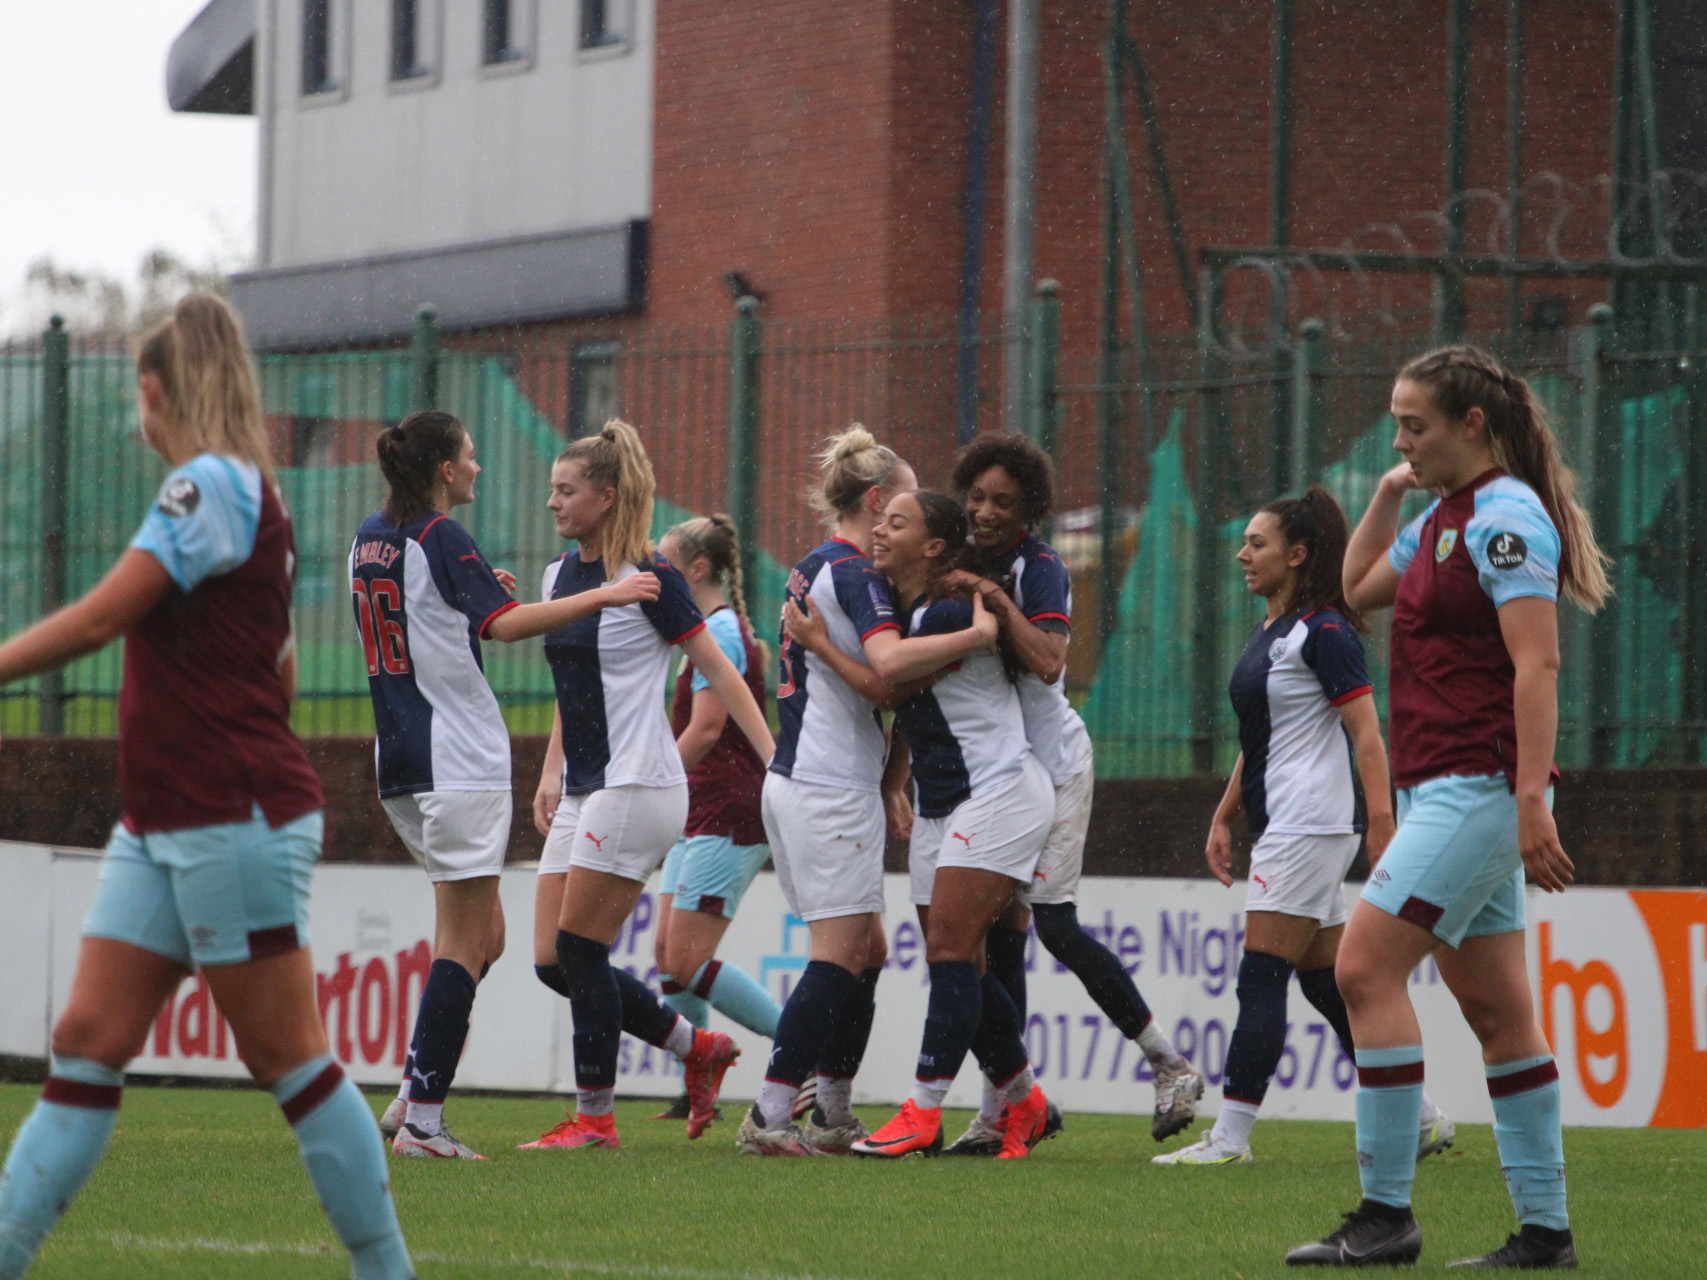 Albion Women secured their first away win of the season on Sunday with a thrilling 4-3 triumph at Burnley